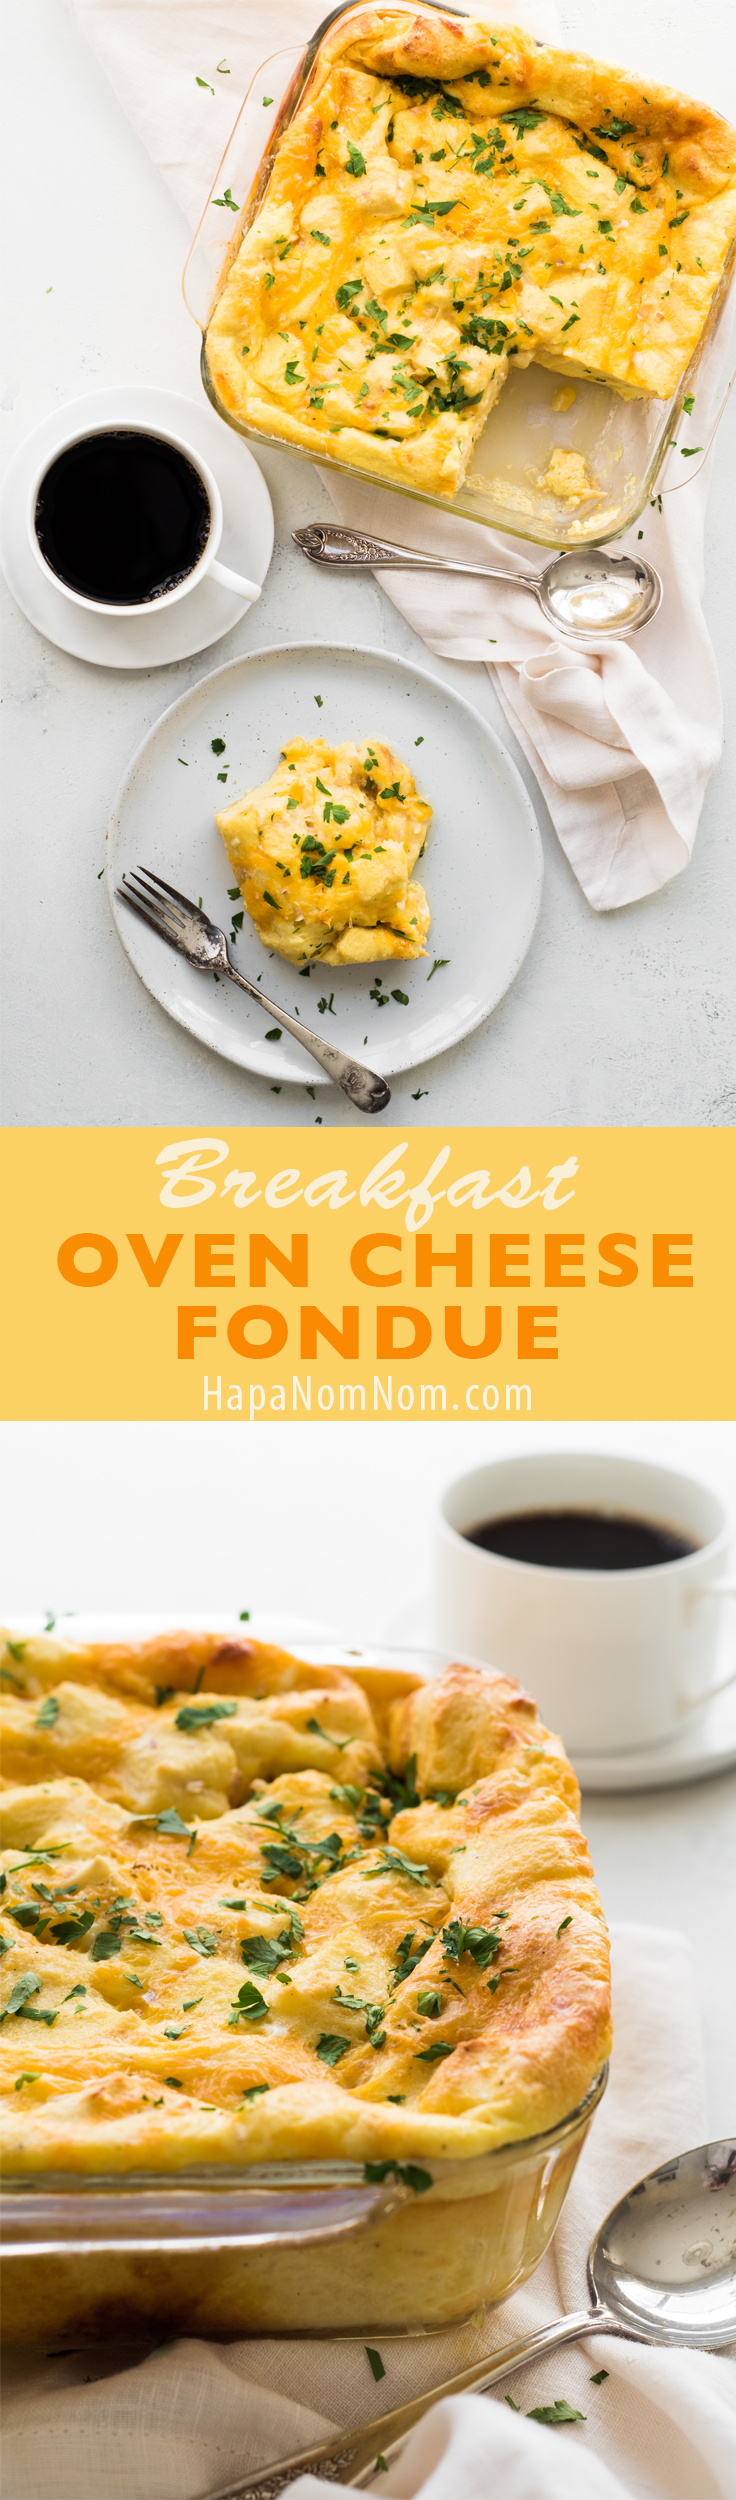 Easy to make, this Christmas Breakfast Oven Cheese Fondue can be made the night before and baked while you're opening gifts.